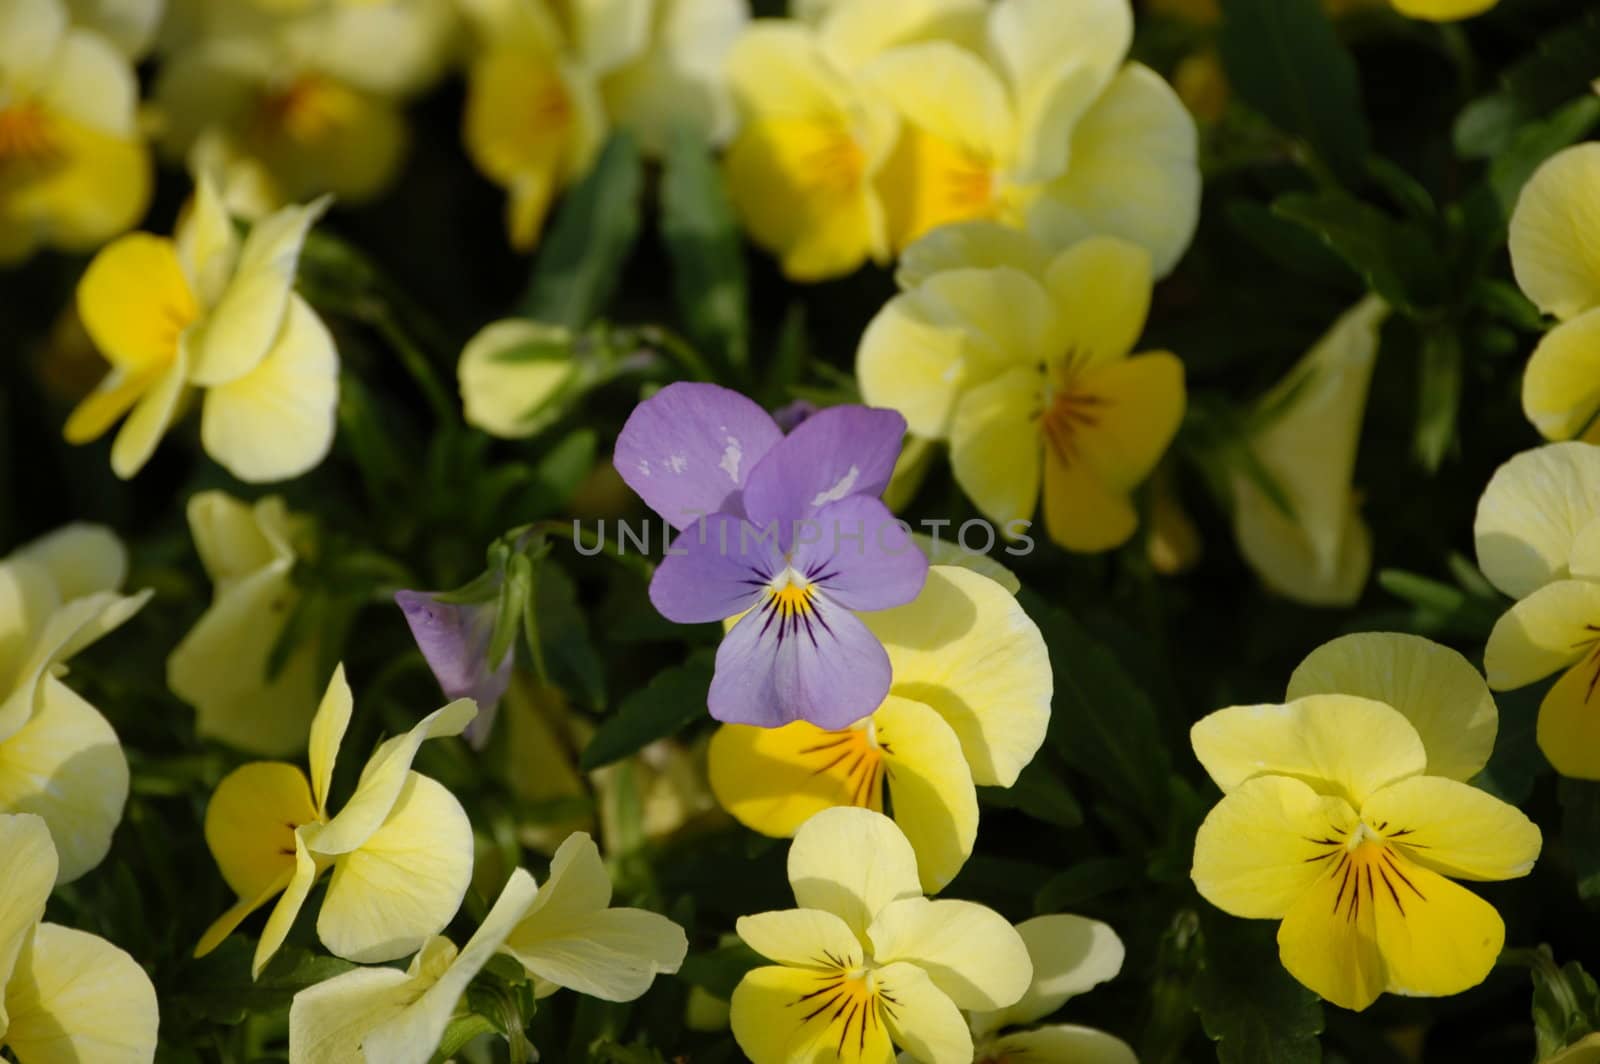 A field of pansies in the spring of the year with one purple one